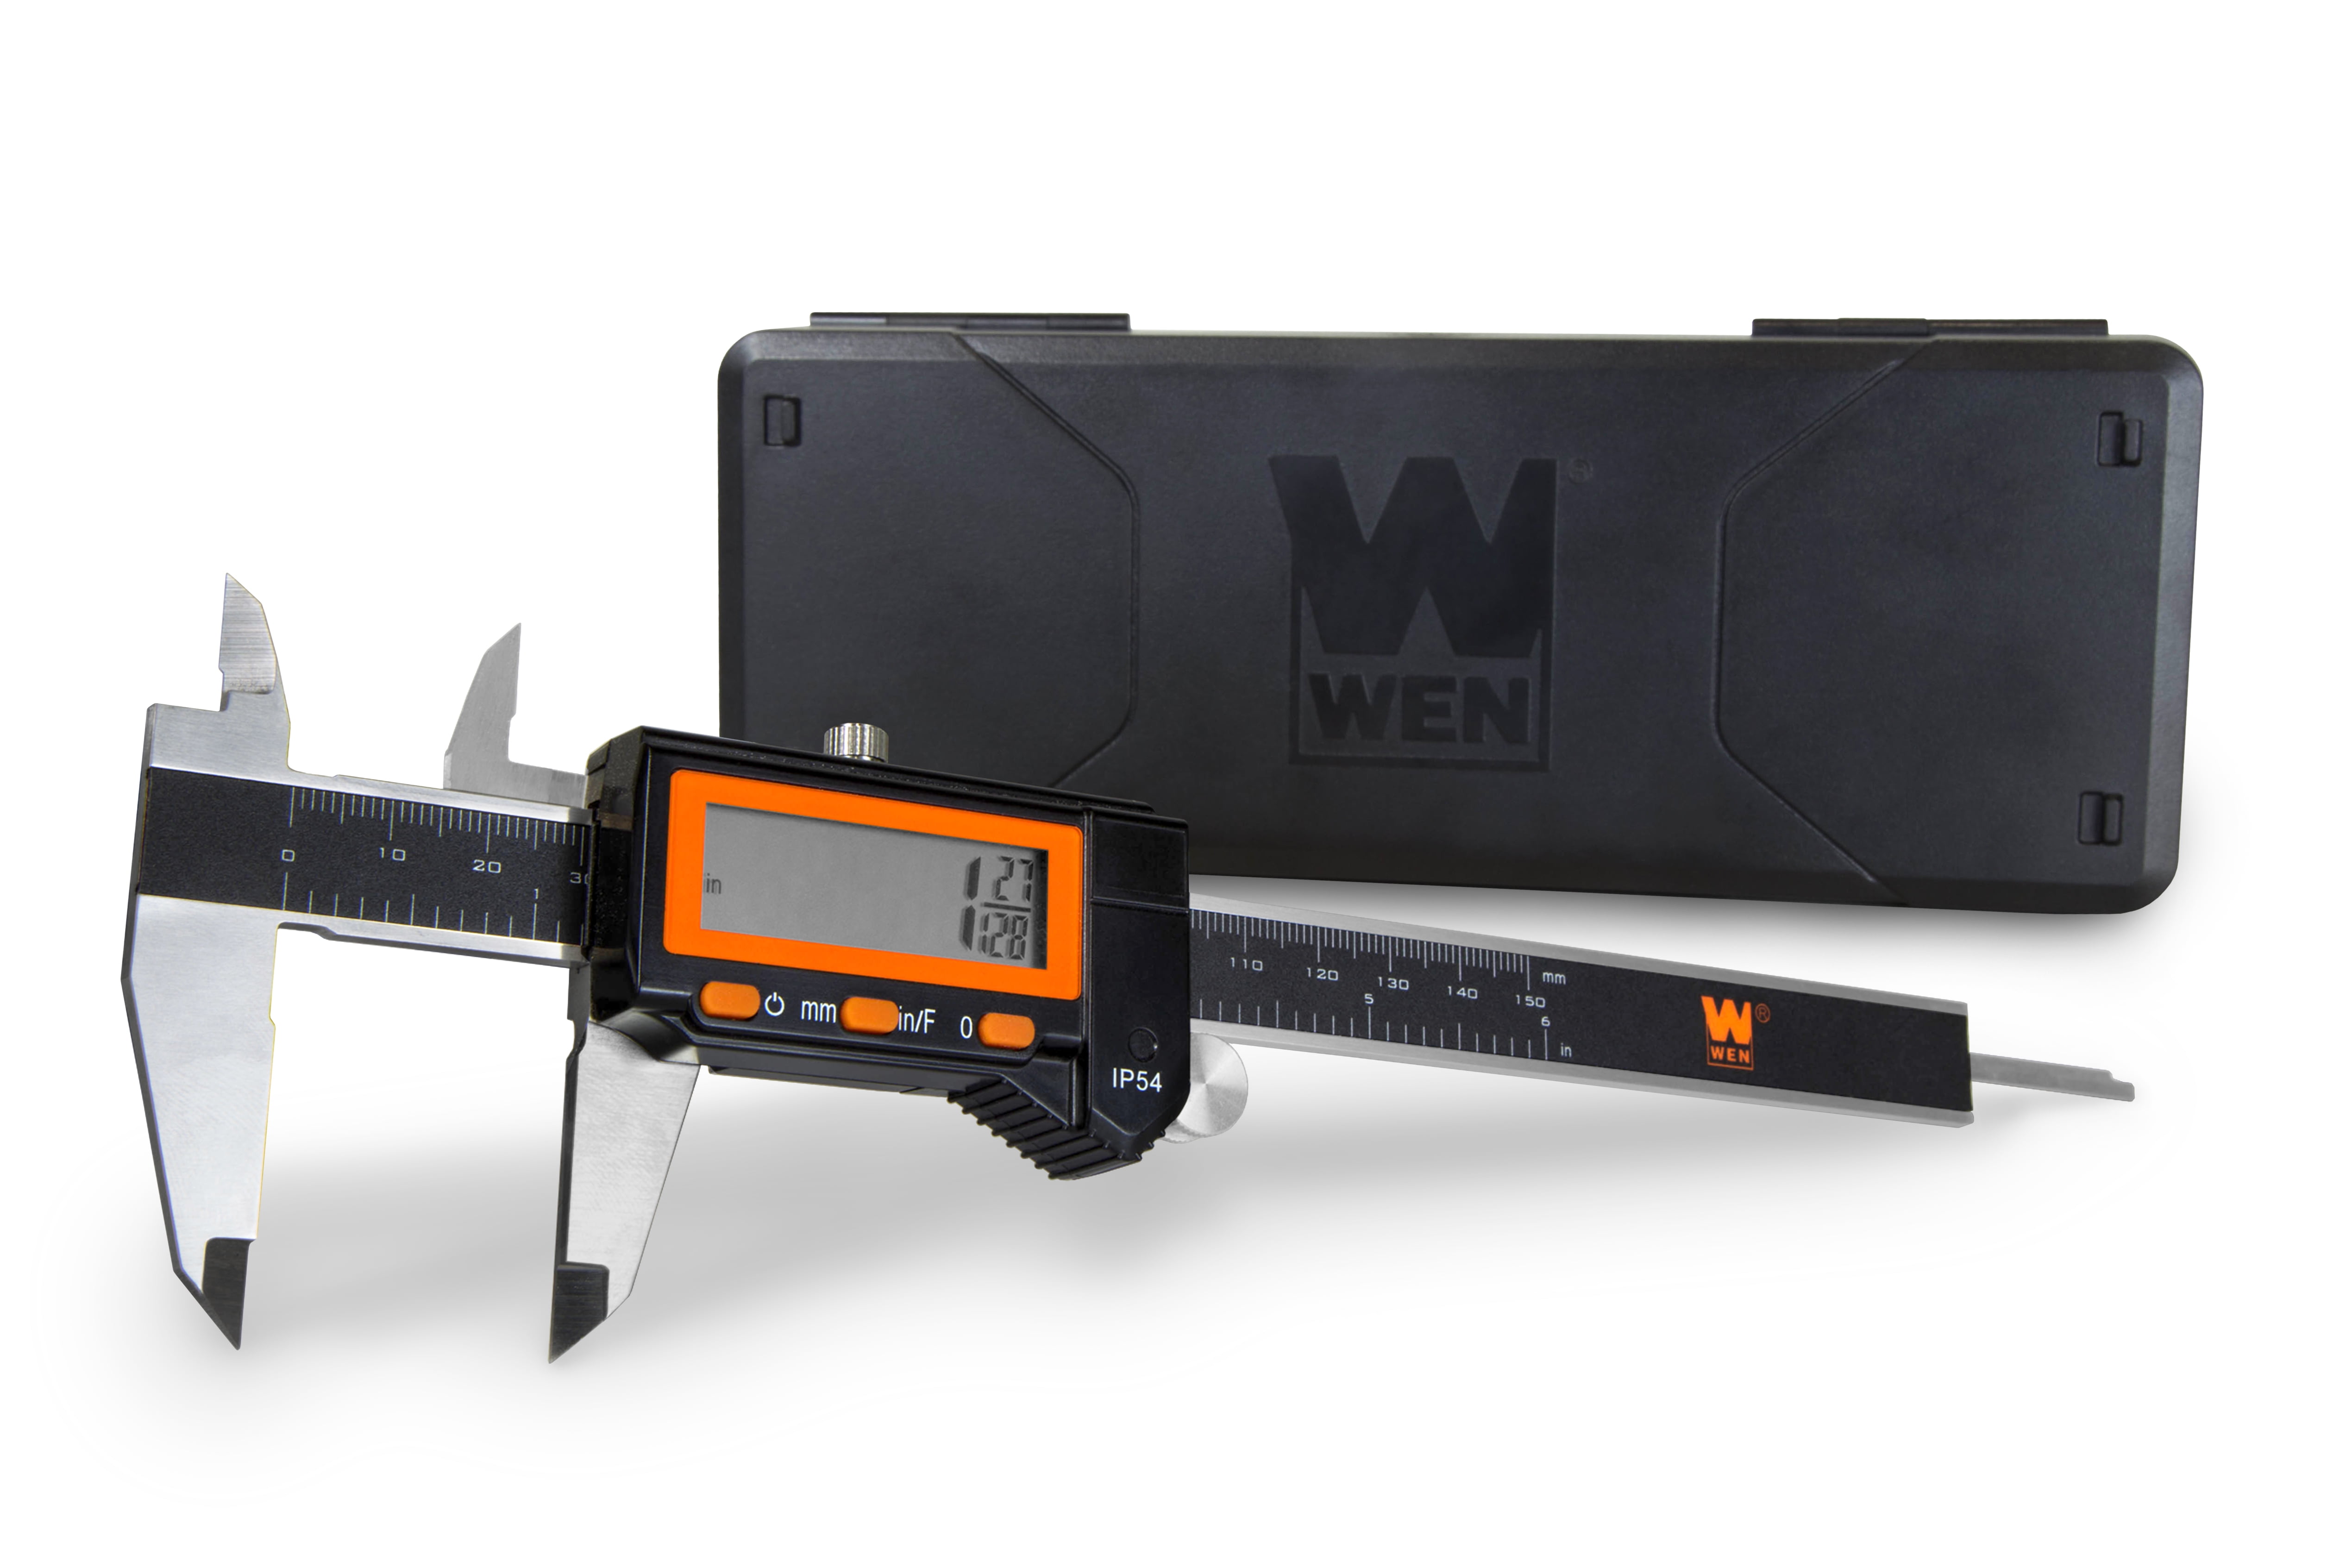 LCD Screen & Case Electronic Digital Caliper with Stainless Steel Construction 